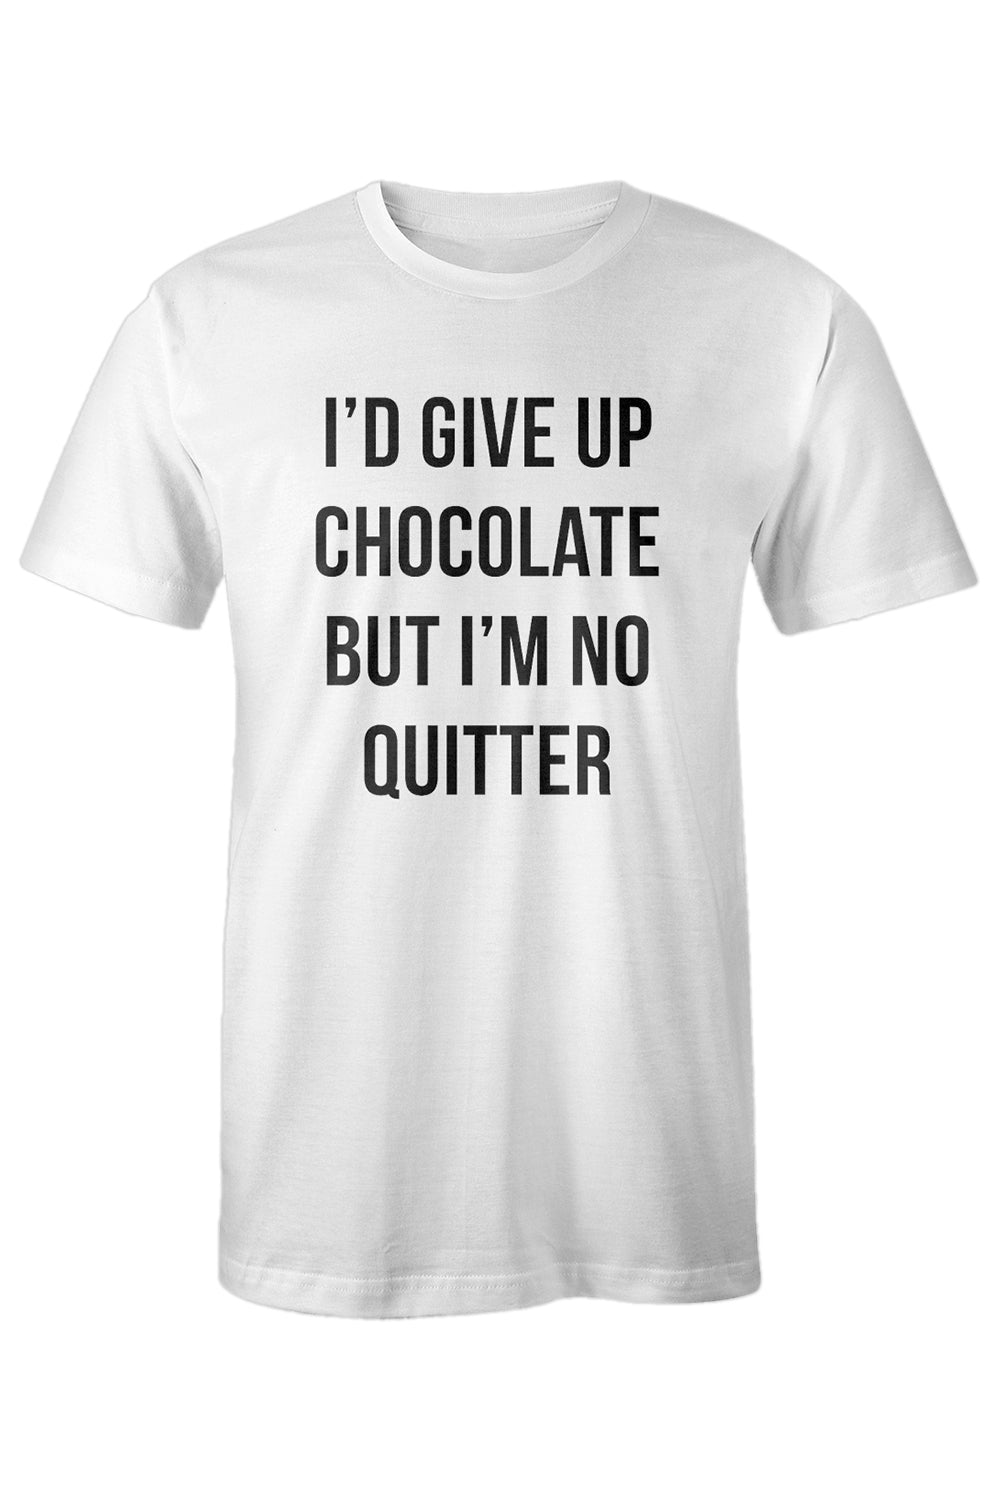 White I'D GIVE UP CHOCOLATE BUT I'M NO QUITTER Men's Graphic T Shirt Men's Tops JT's Designer Fashion